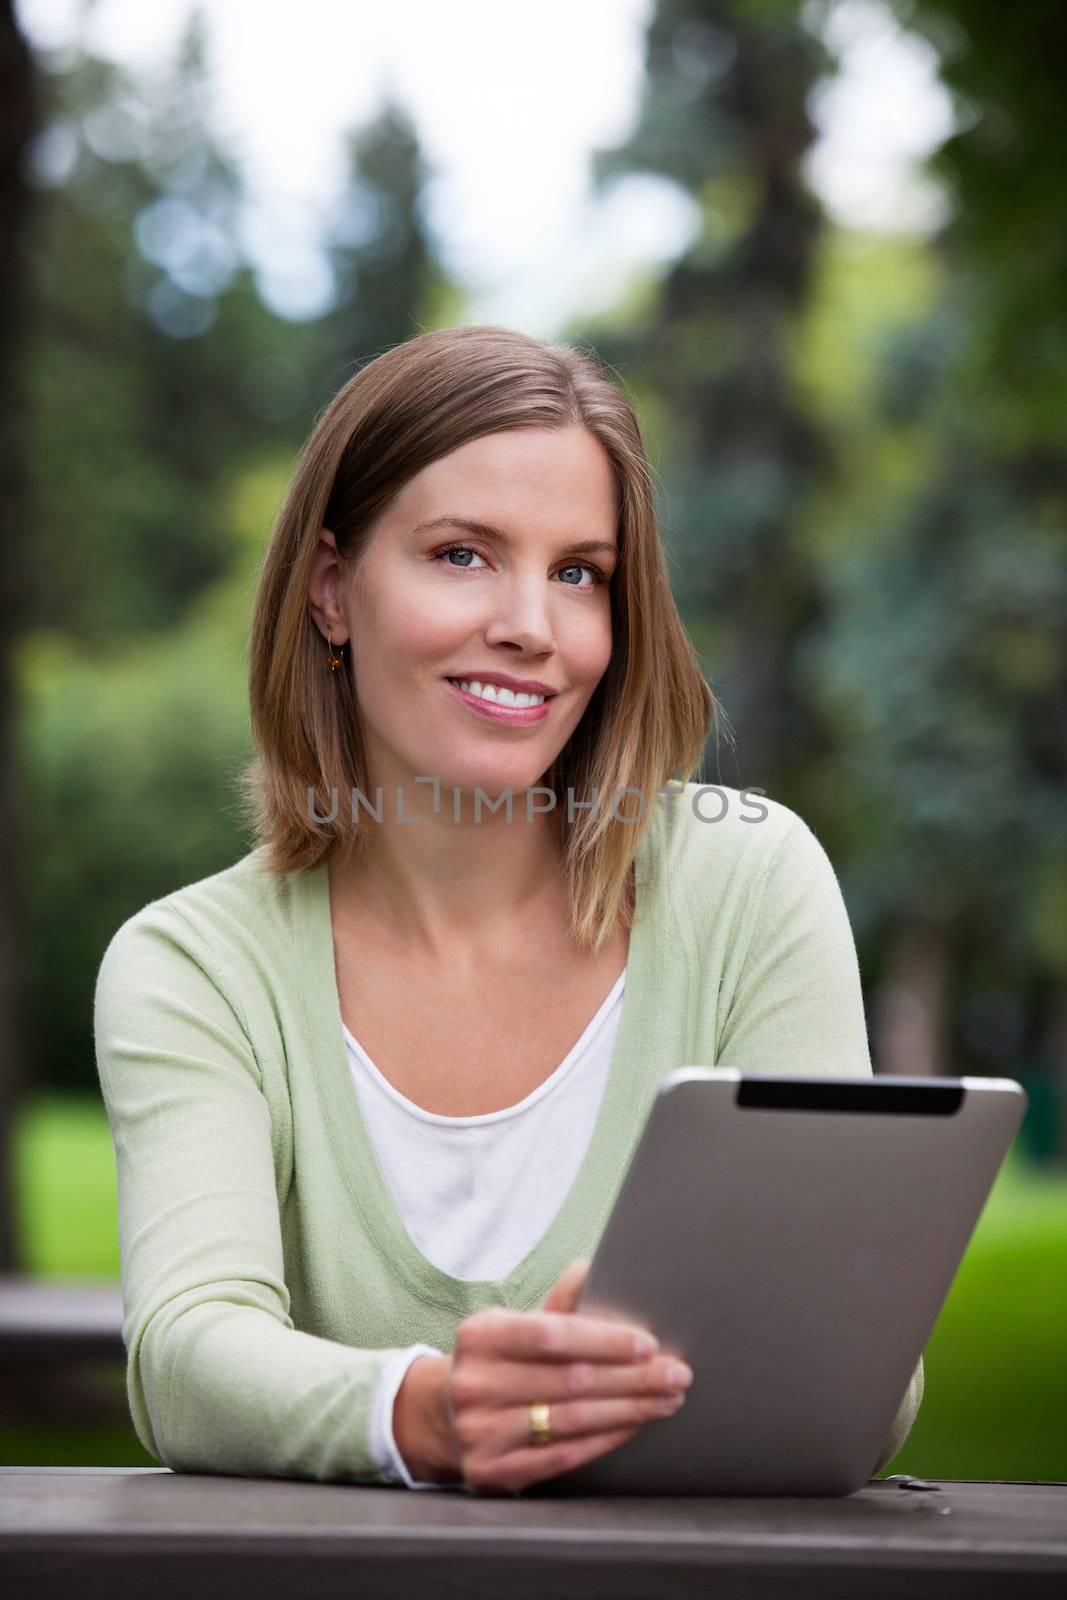 Woman holding Digital Tablet in park.